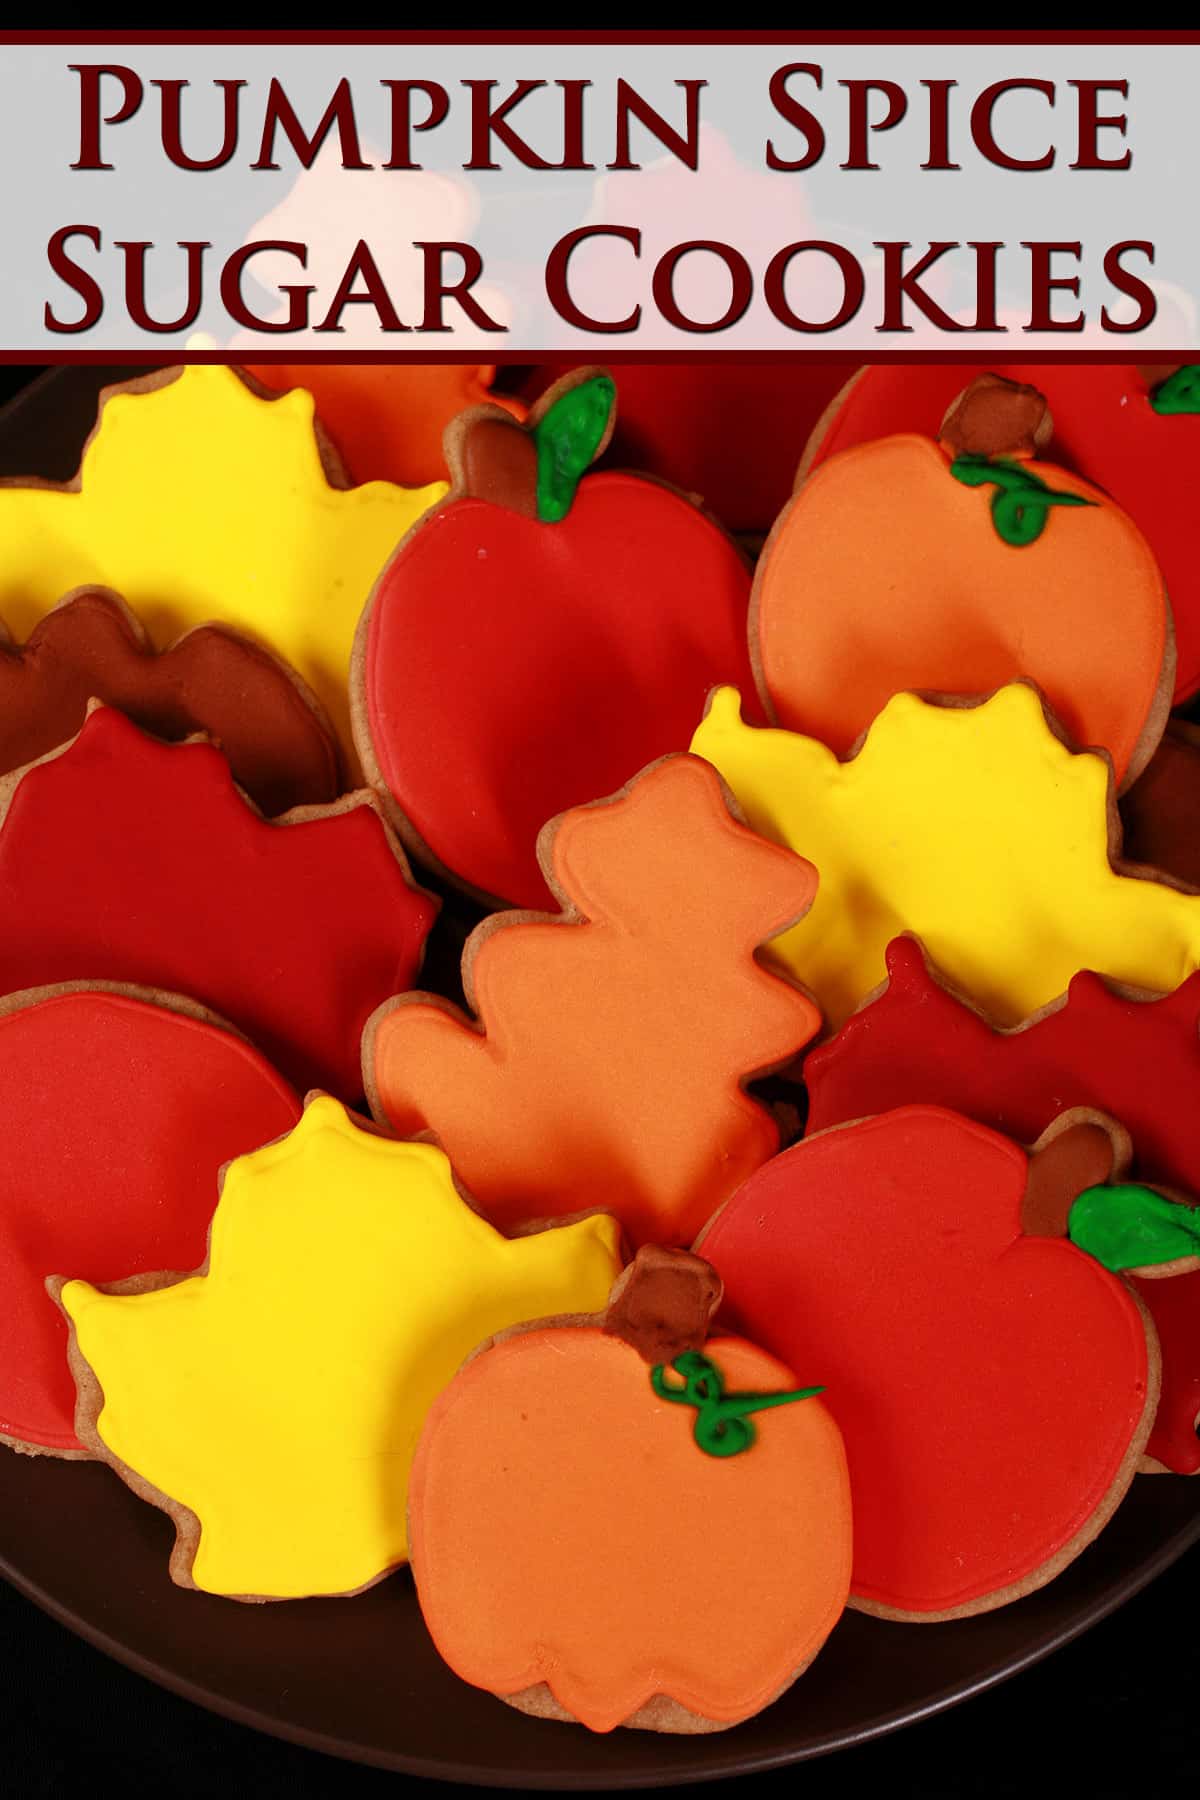 A plate of pumpkin spice sugar cookies decorated in brightly colored royal icing to look like apples, pumpkins, and fall leaves.